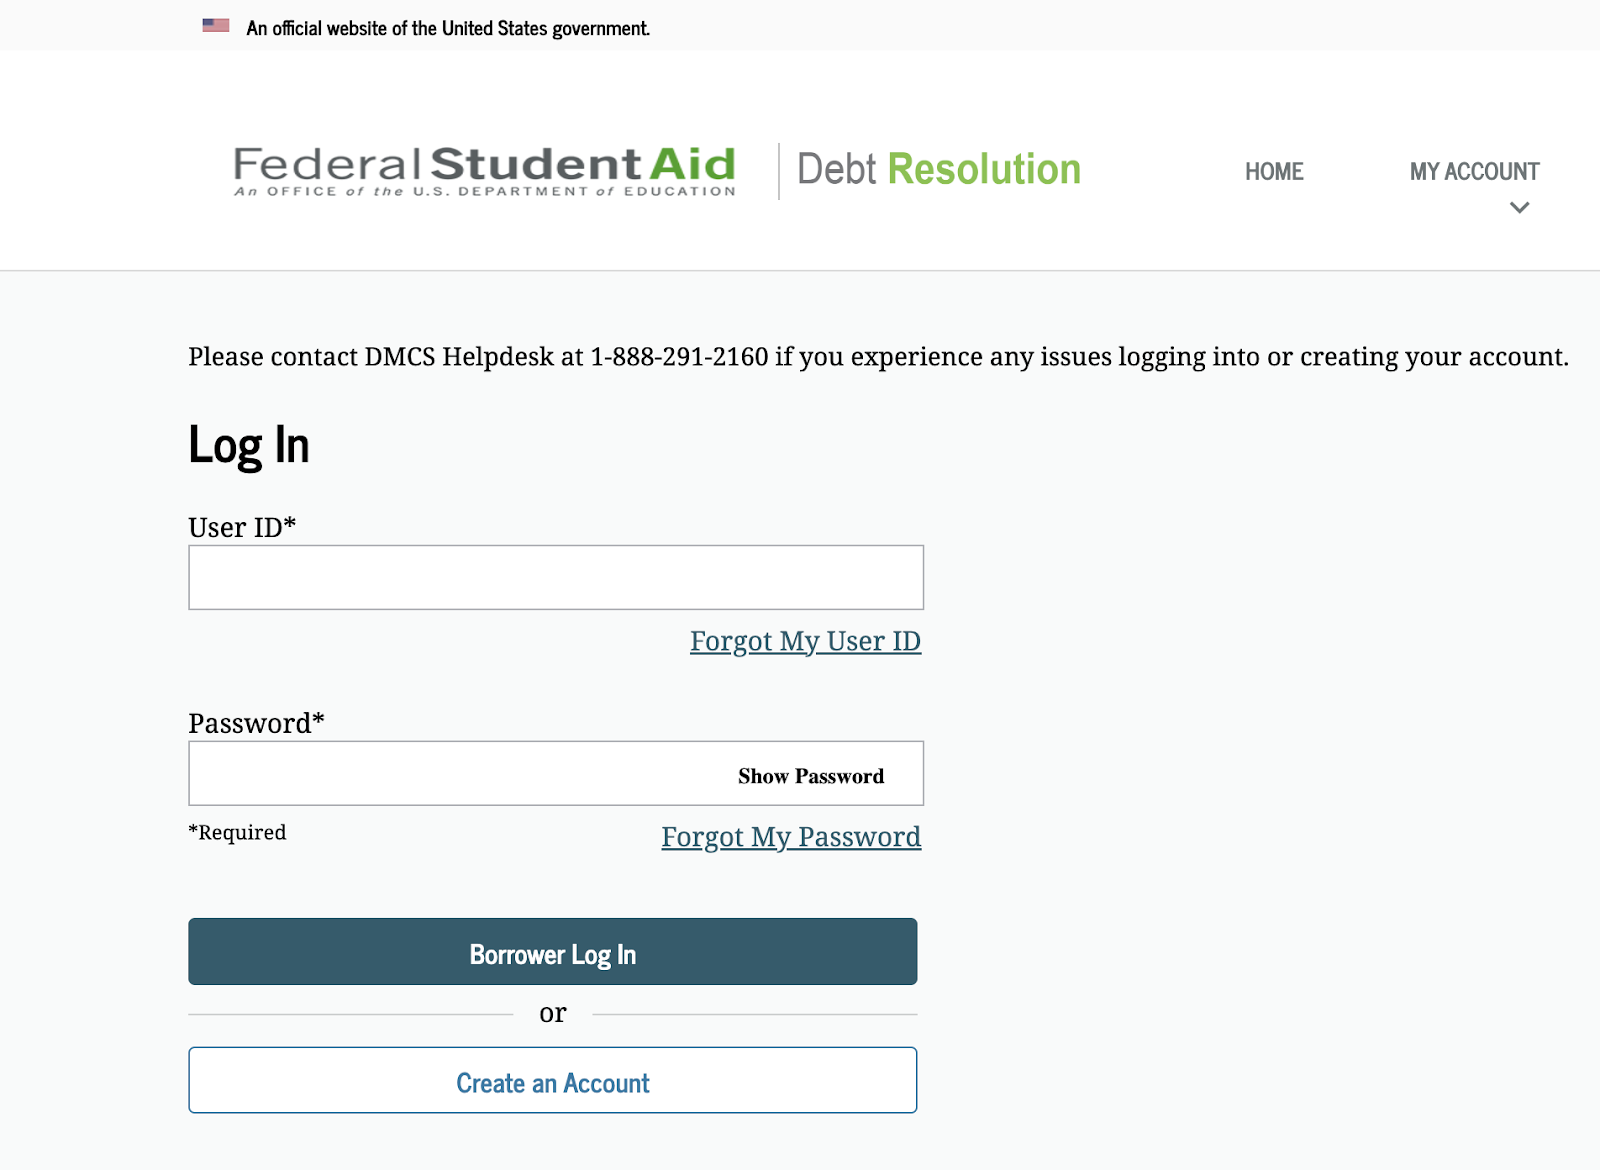 A screenshot showing the login for the studentaid.gov debt resolution page